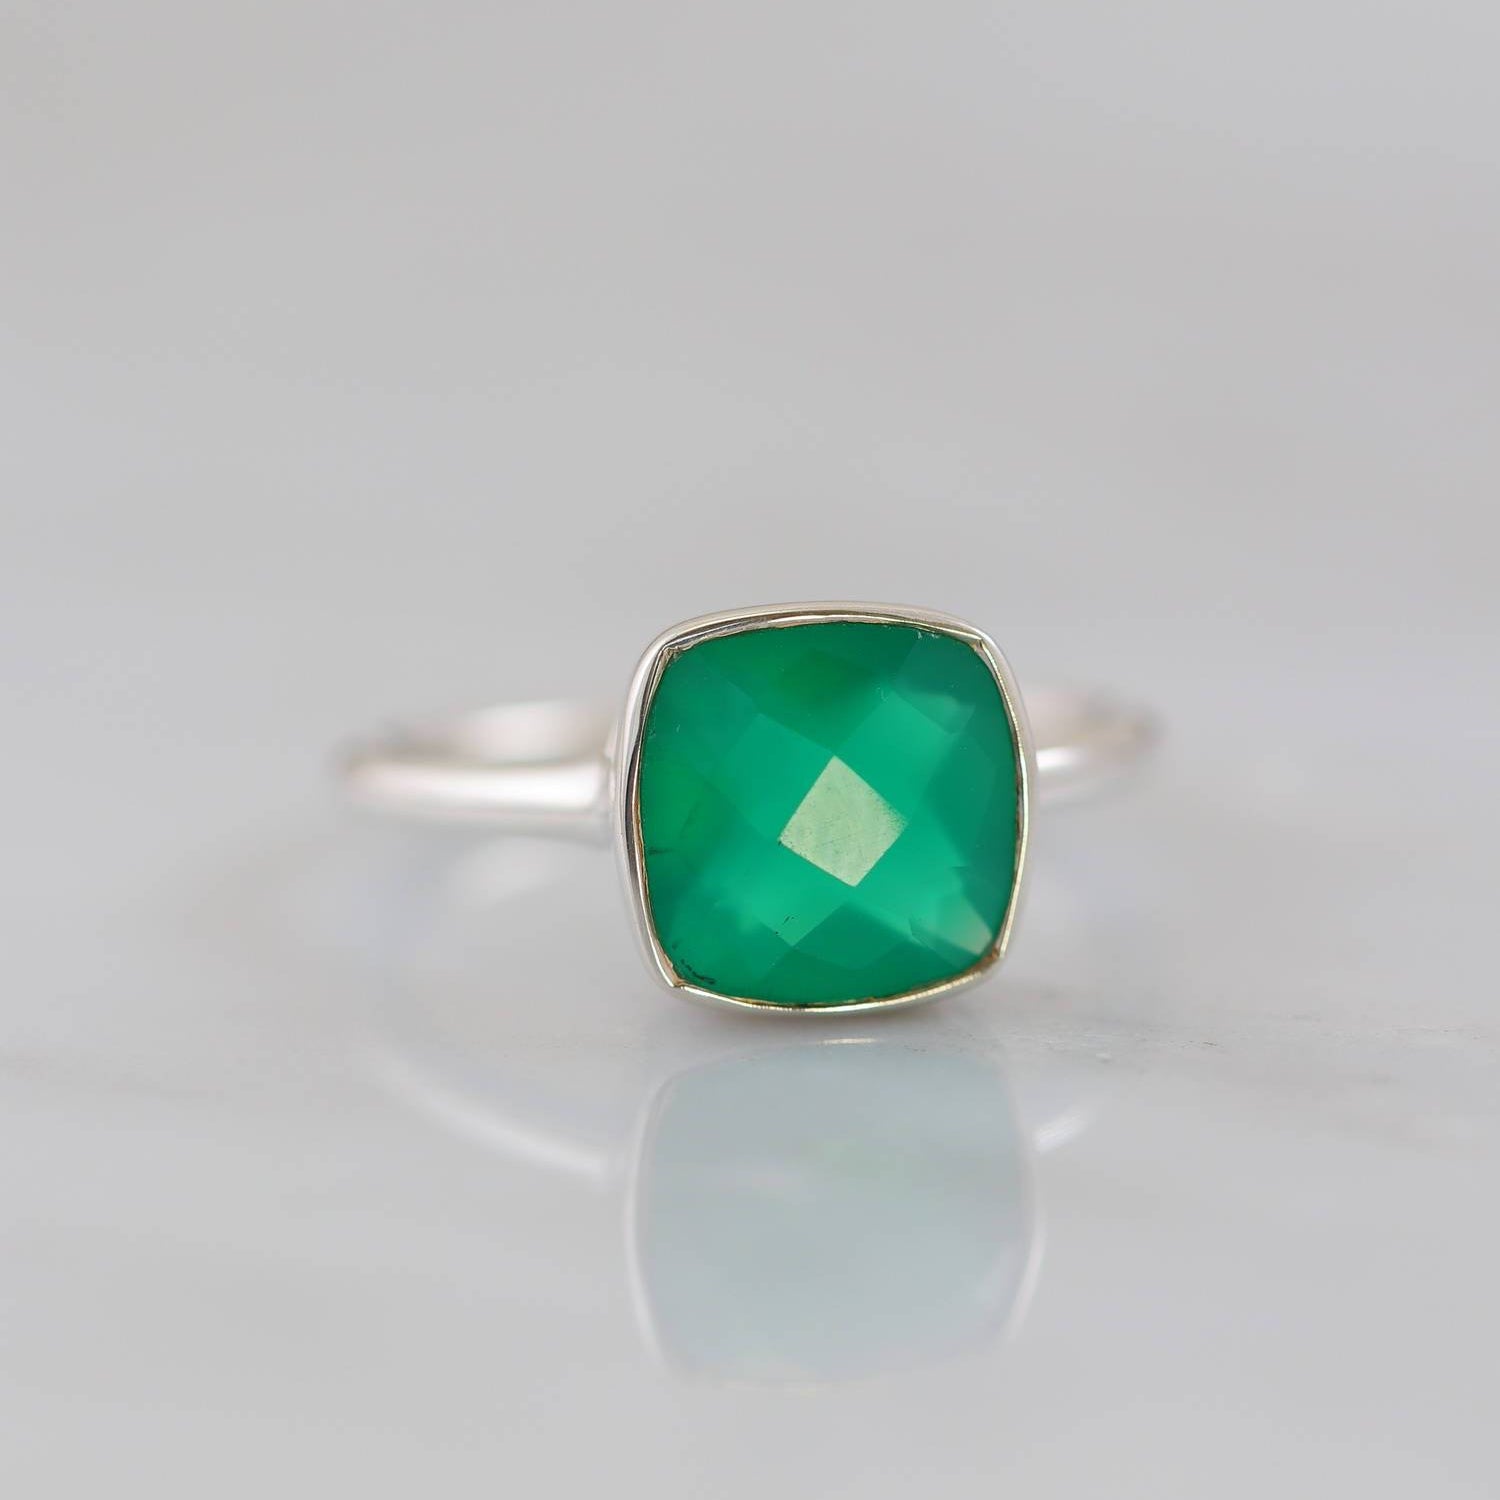 Green Onyx Ring, Green Gemstone Stacker rings, Onyx Ring, Emerald Jewelry, Designer Rings, Everyday simple ring, Anniversary Gift, Wife Gift